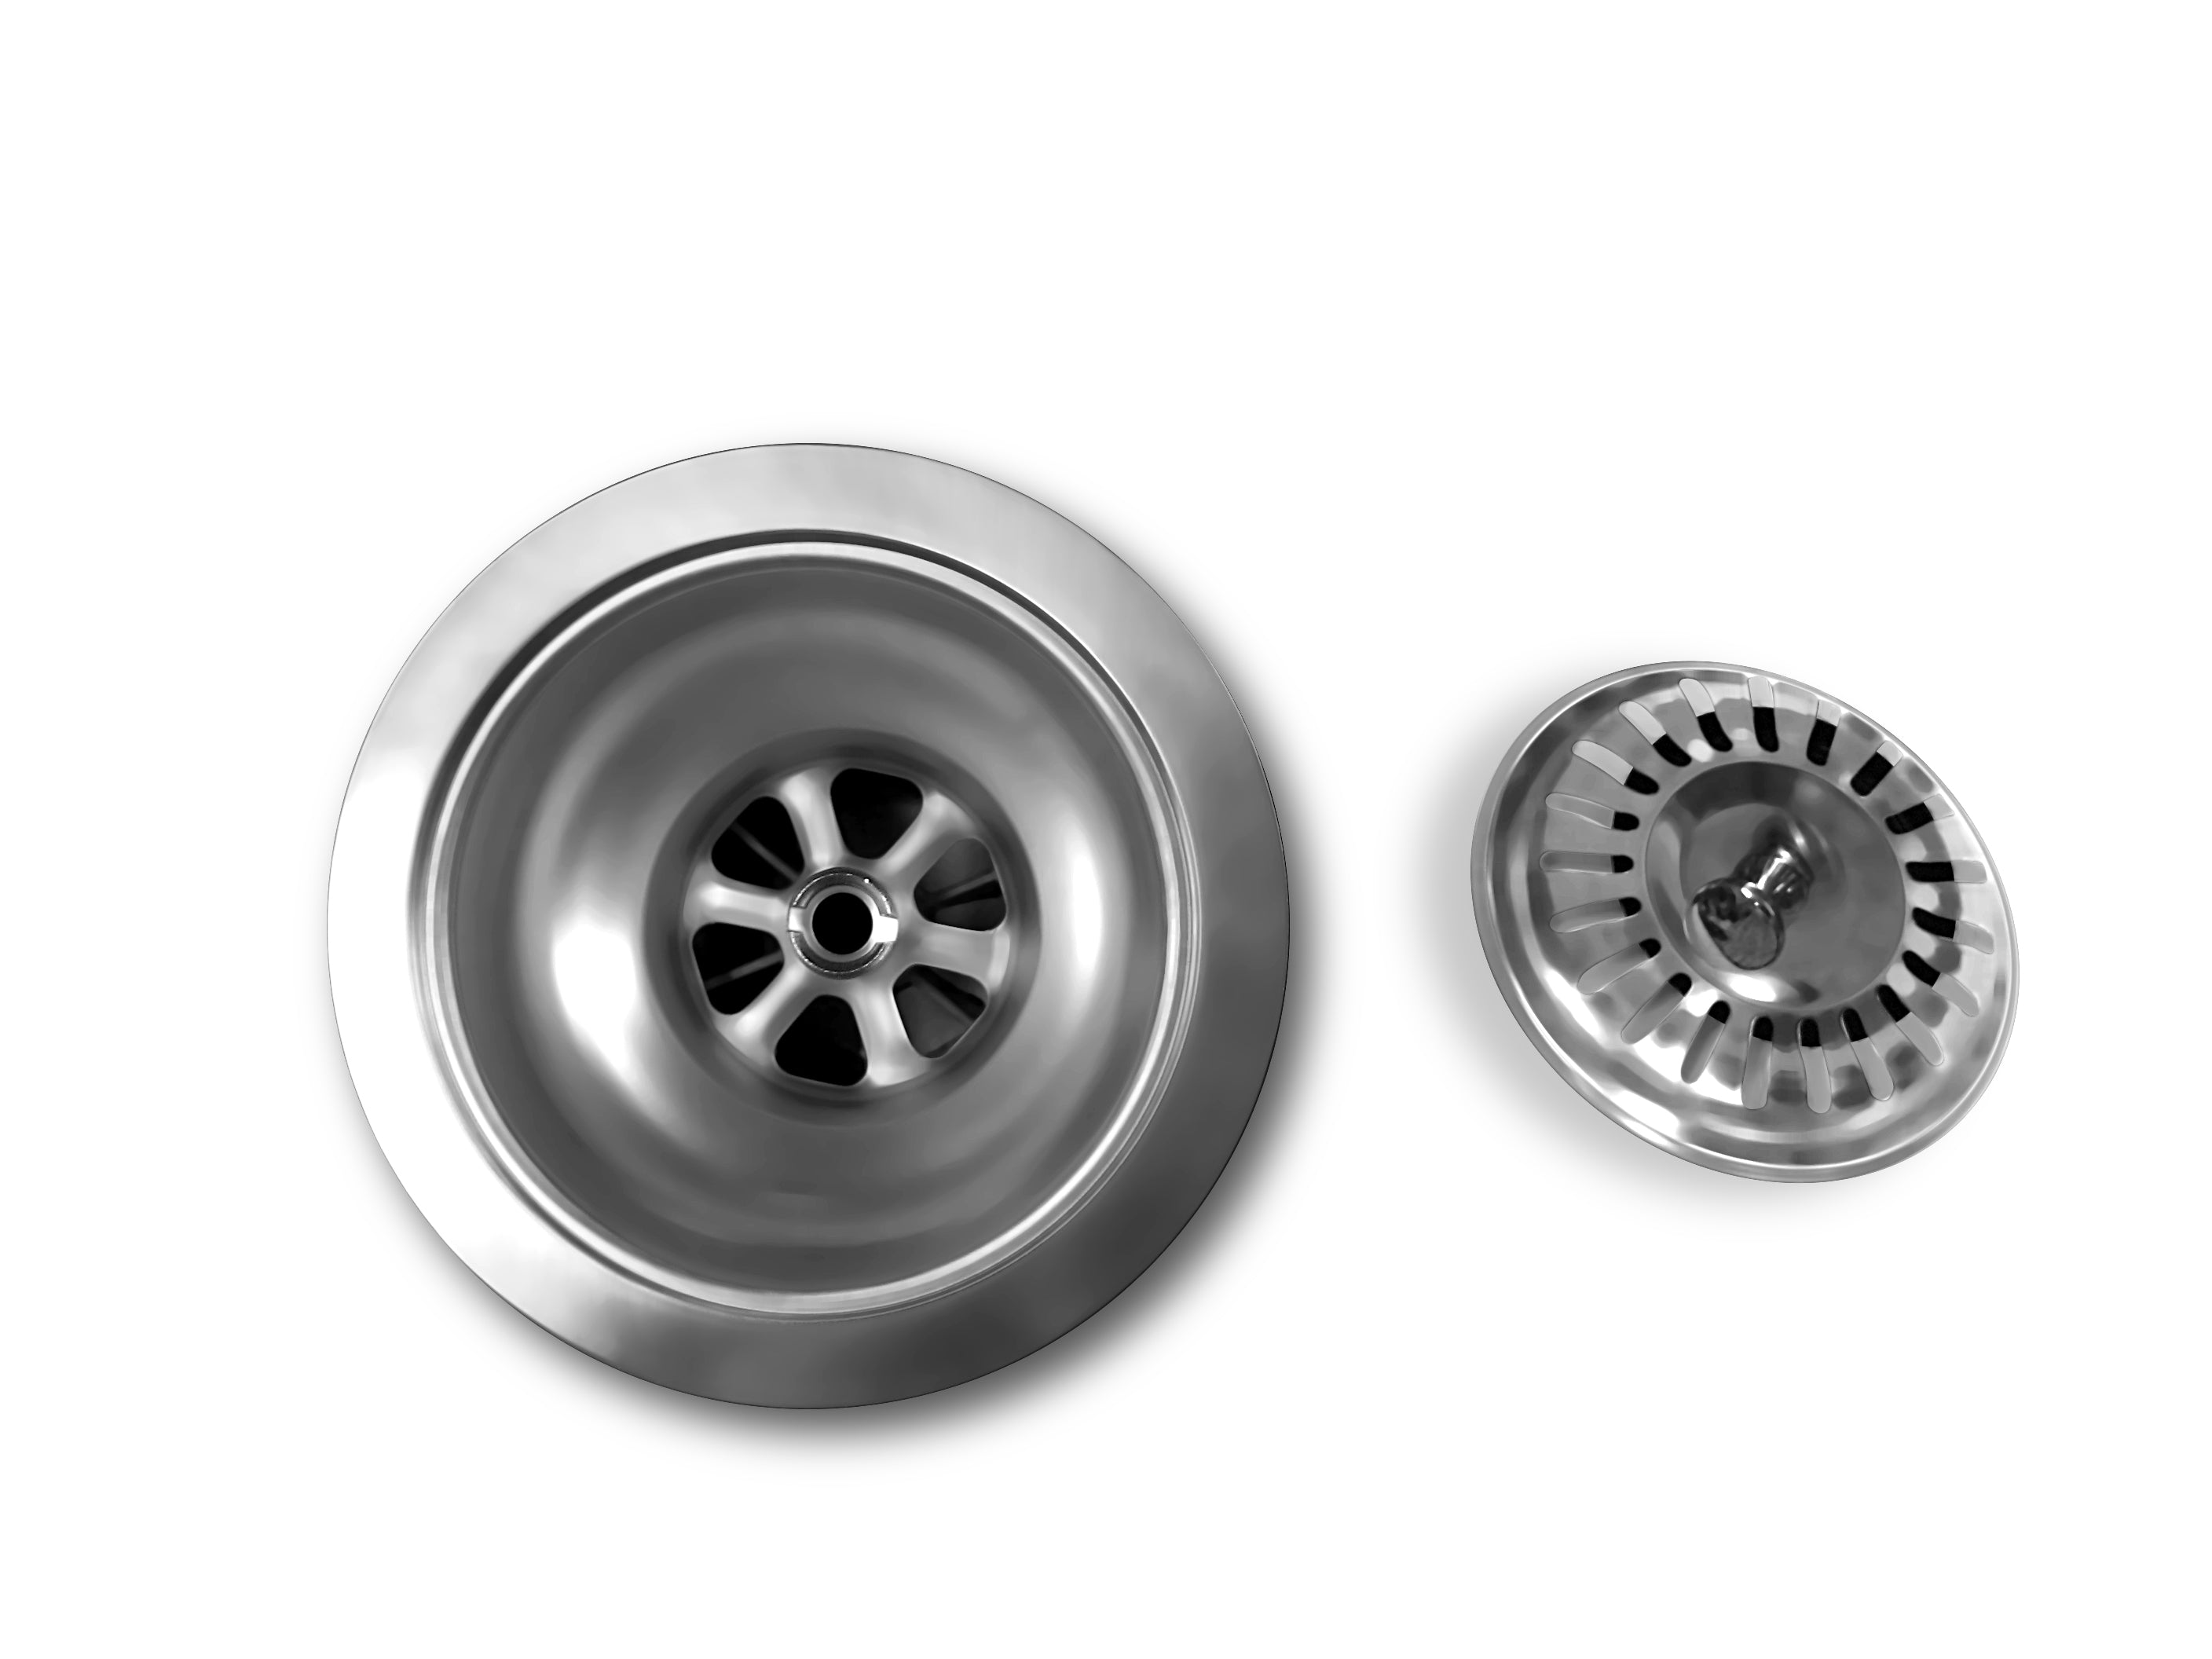 Sink Strainer for Stainless Steel Sinks